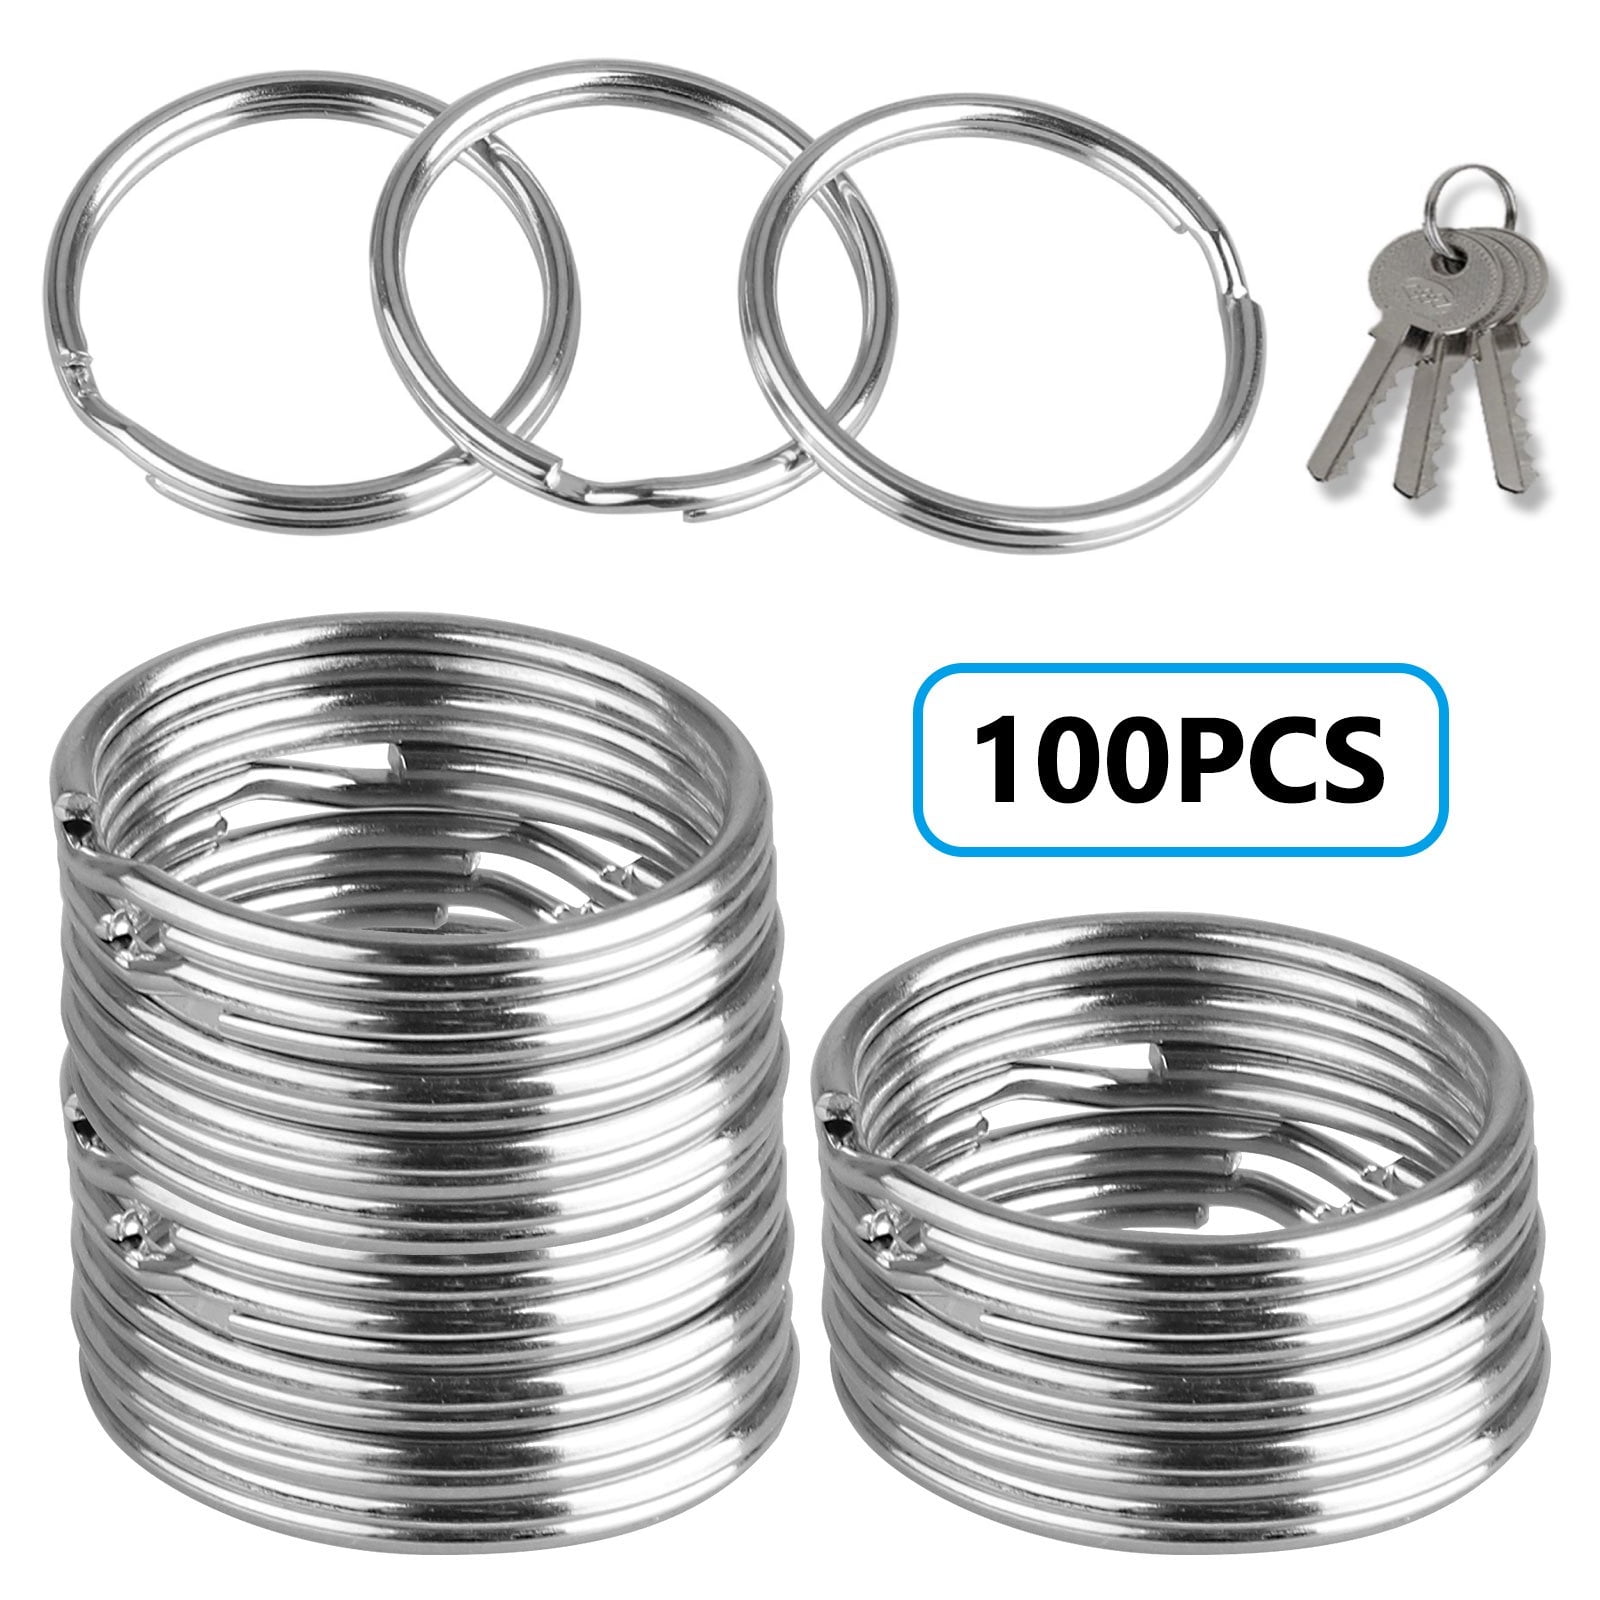 Keychain Making Supplies Paxcoo 50Pcs Keychains with Chain and 50 Pcs Jump Rings  Keychain Rings Kit Keychain Findings Bulk for Keychain Making DIY Crafts